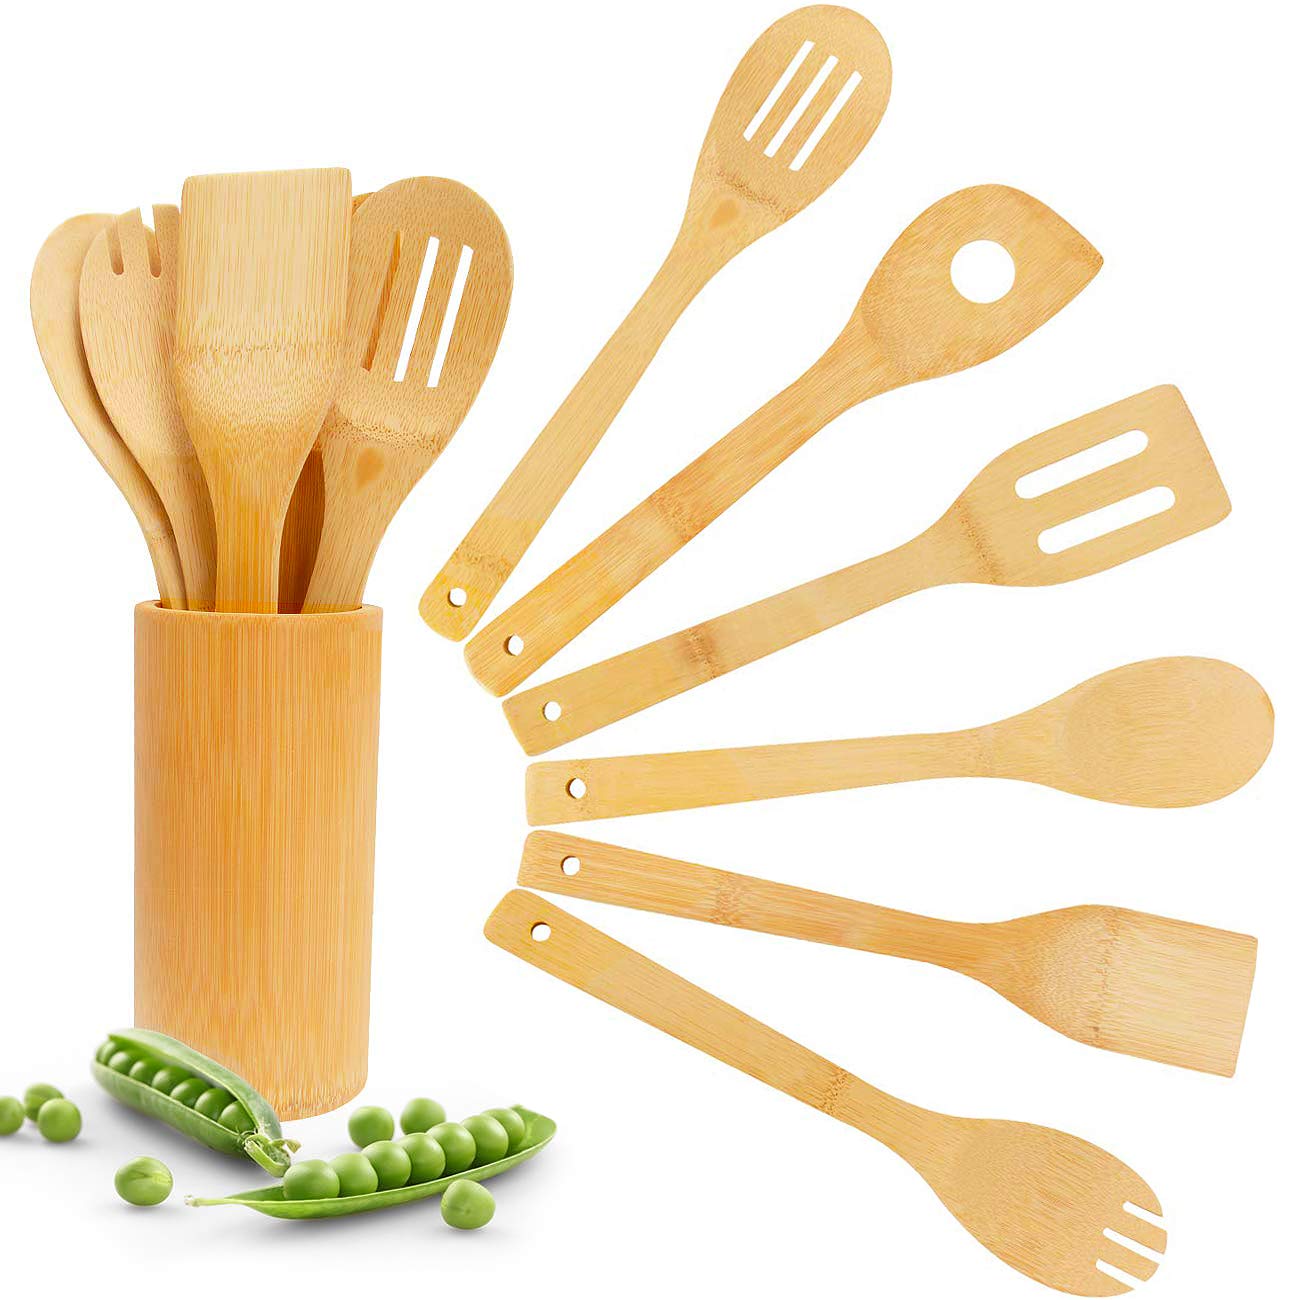 Kitchen Utensil Set with Holder Caddy Crock Rest Bamboo Nonstick Cooking Spoons Spatulas 6 Pieces Antimicrobial Healthy Kitchen Tools